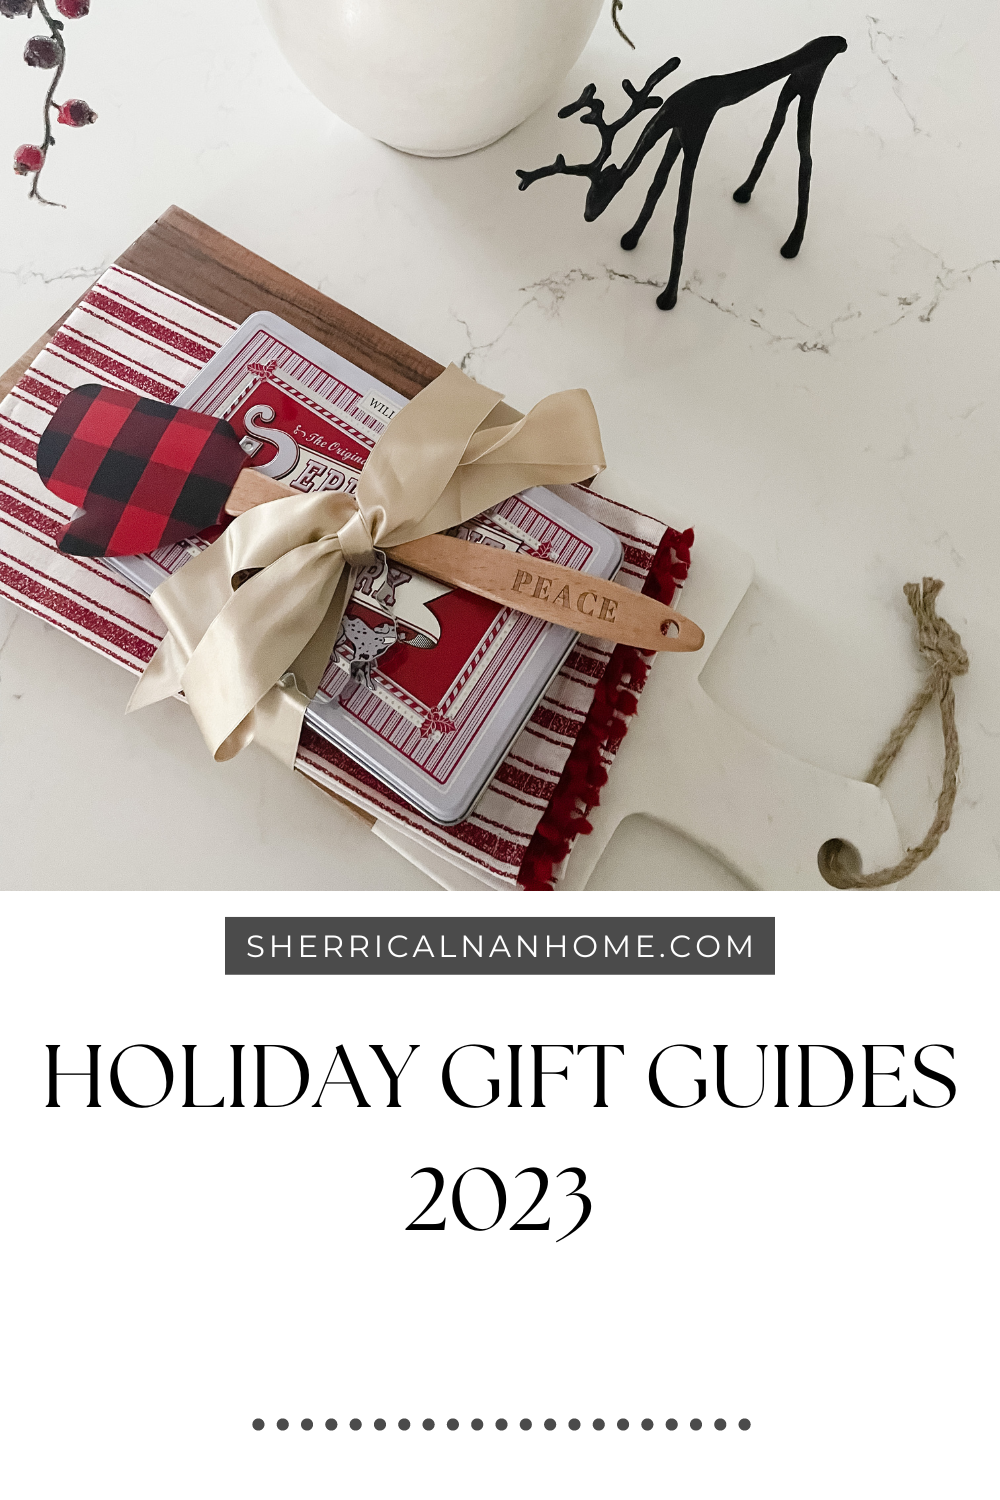 holiday gift guides, sherri calnan, home and decor, holiday gifts, christmas gift ideas